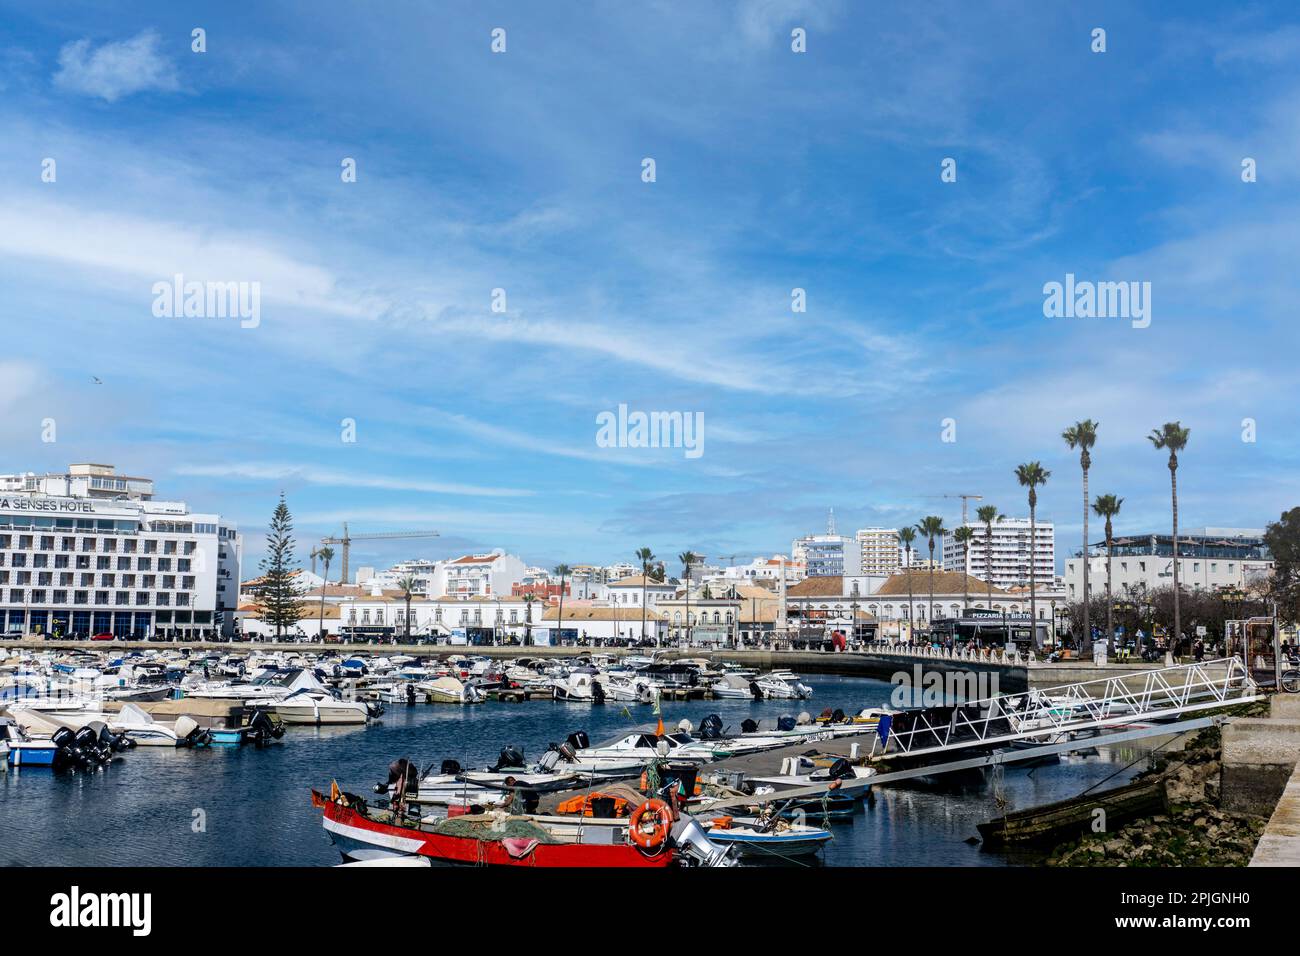 The boating marina in the port of Faro, Portugal Stock Photo